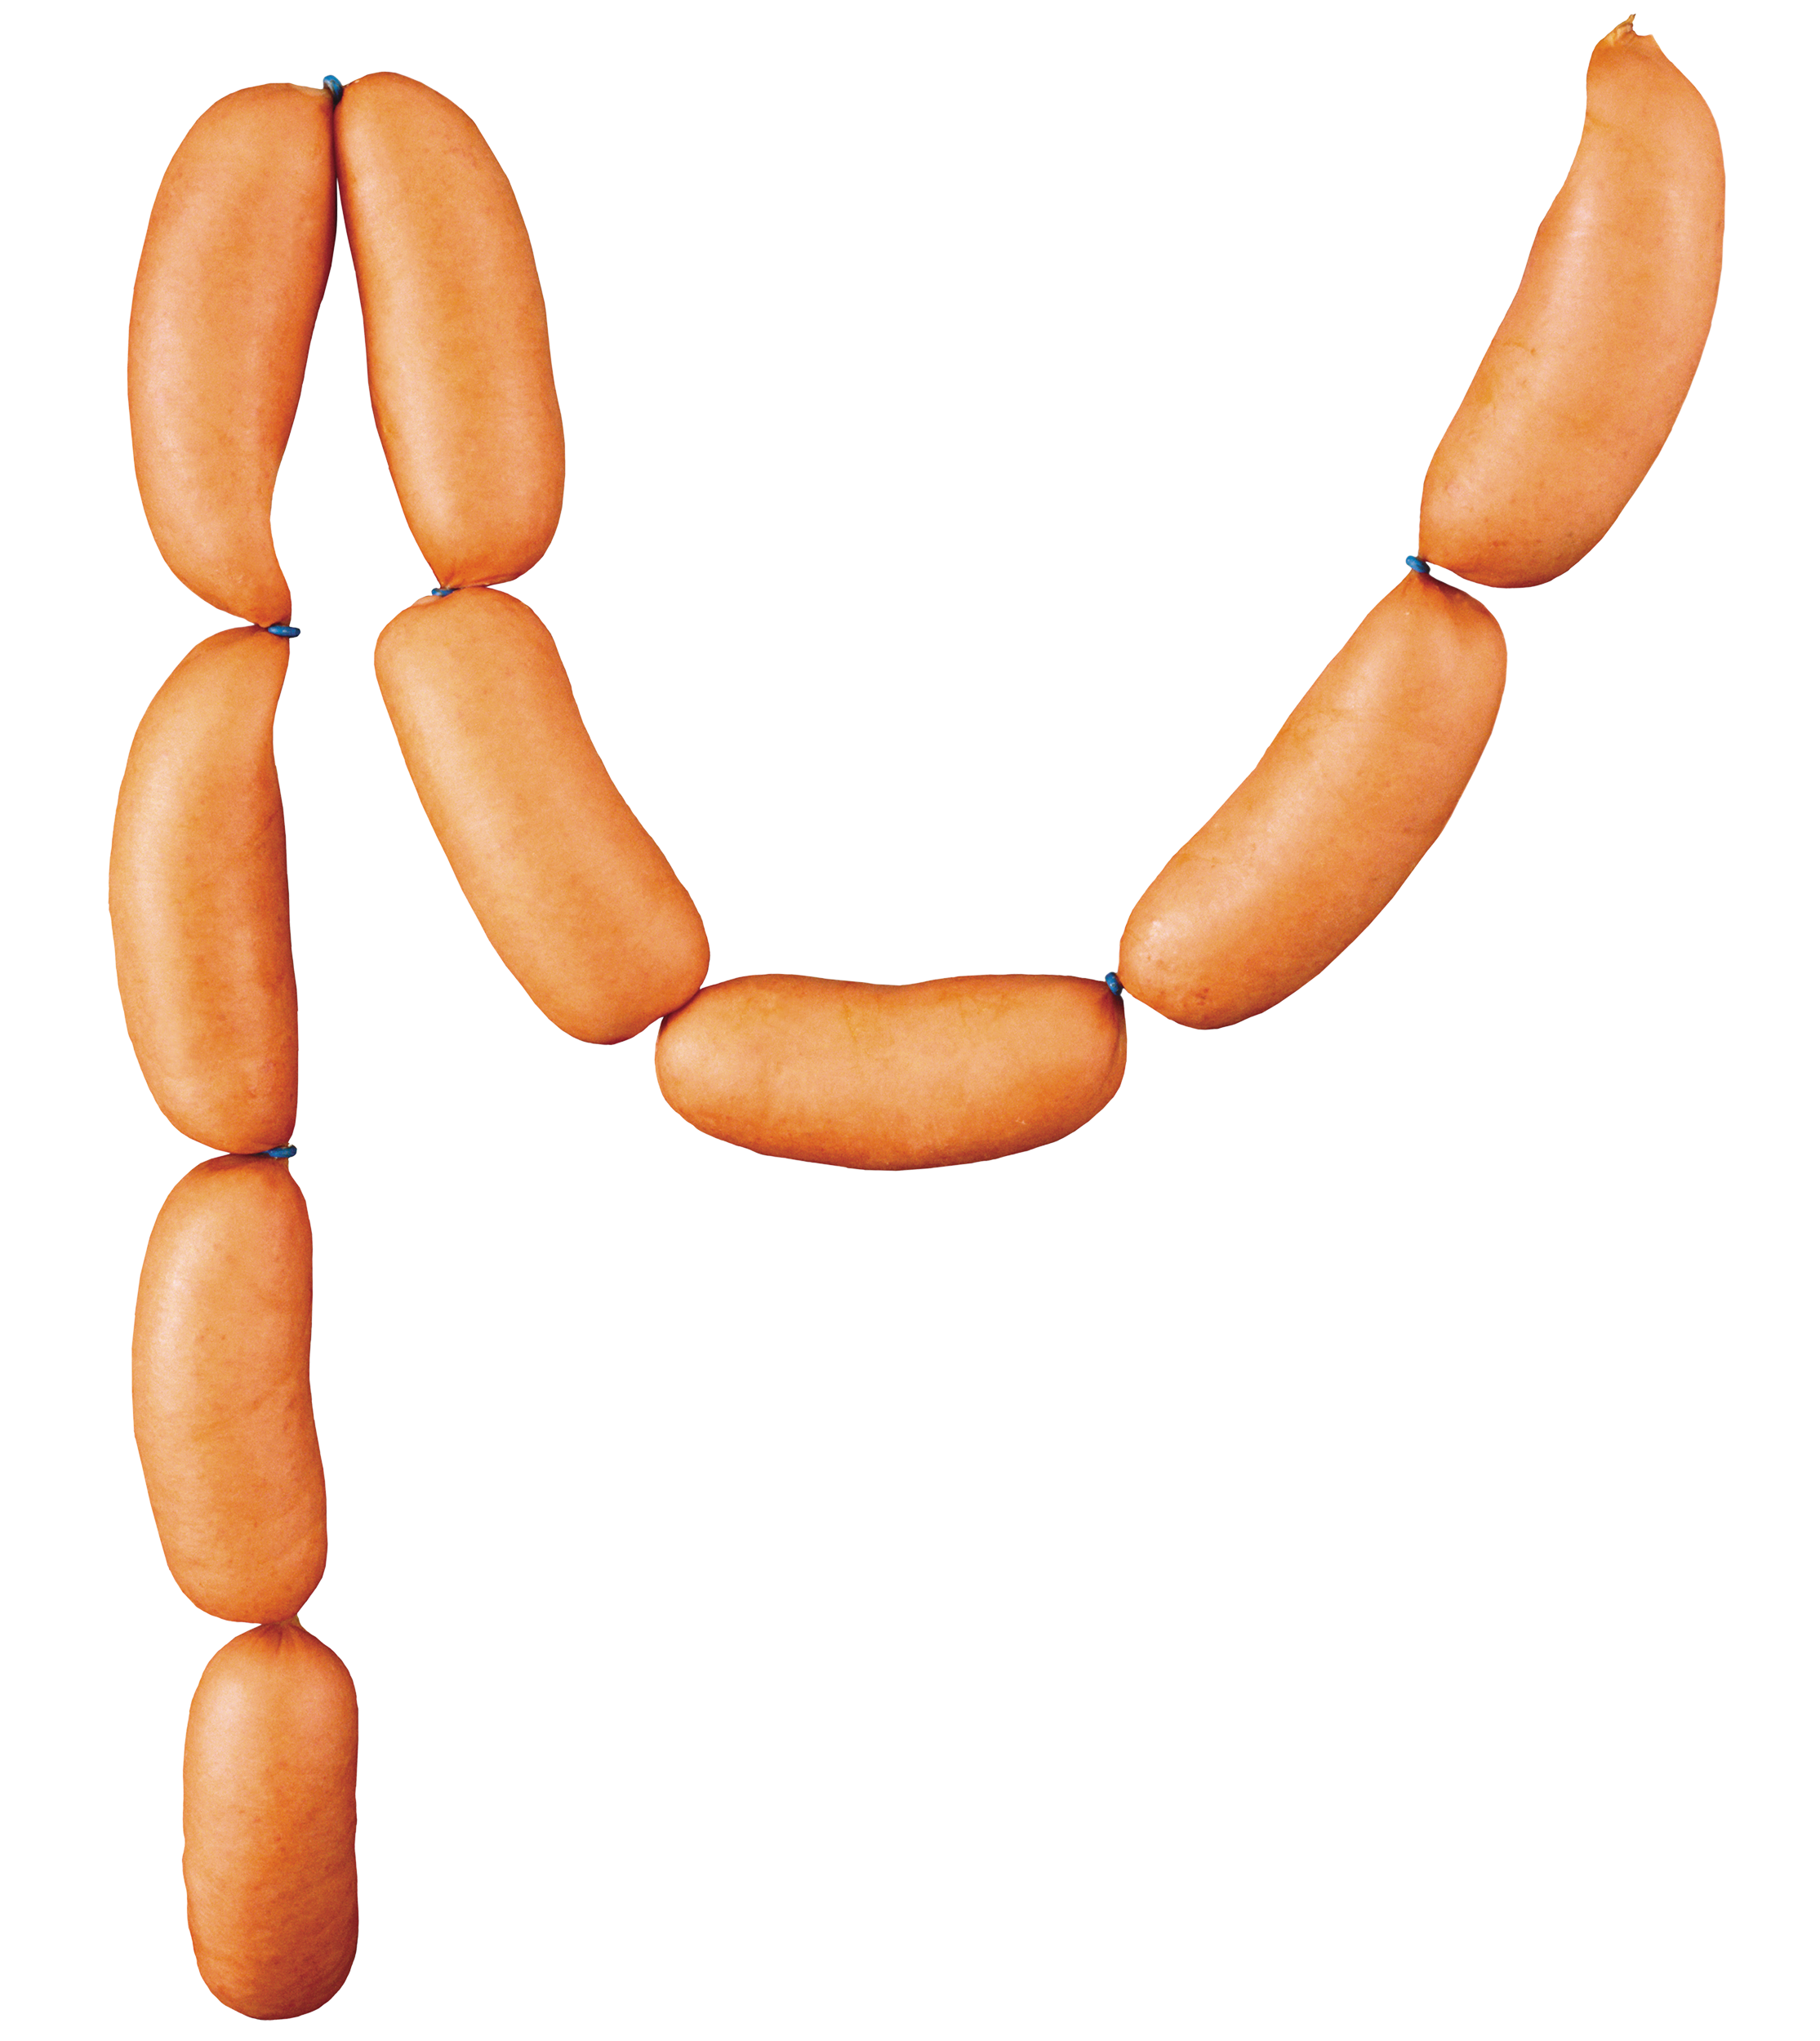 Small png images. Sausages clipart best web